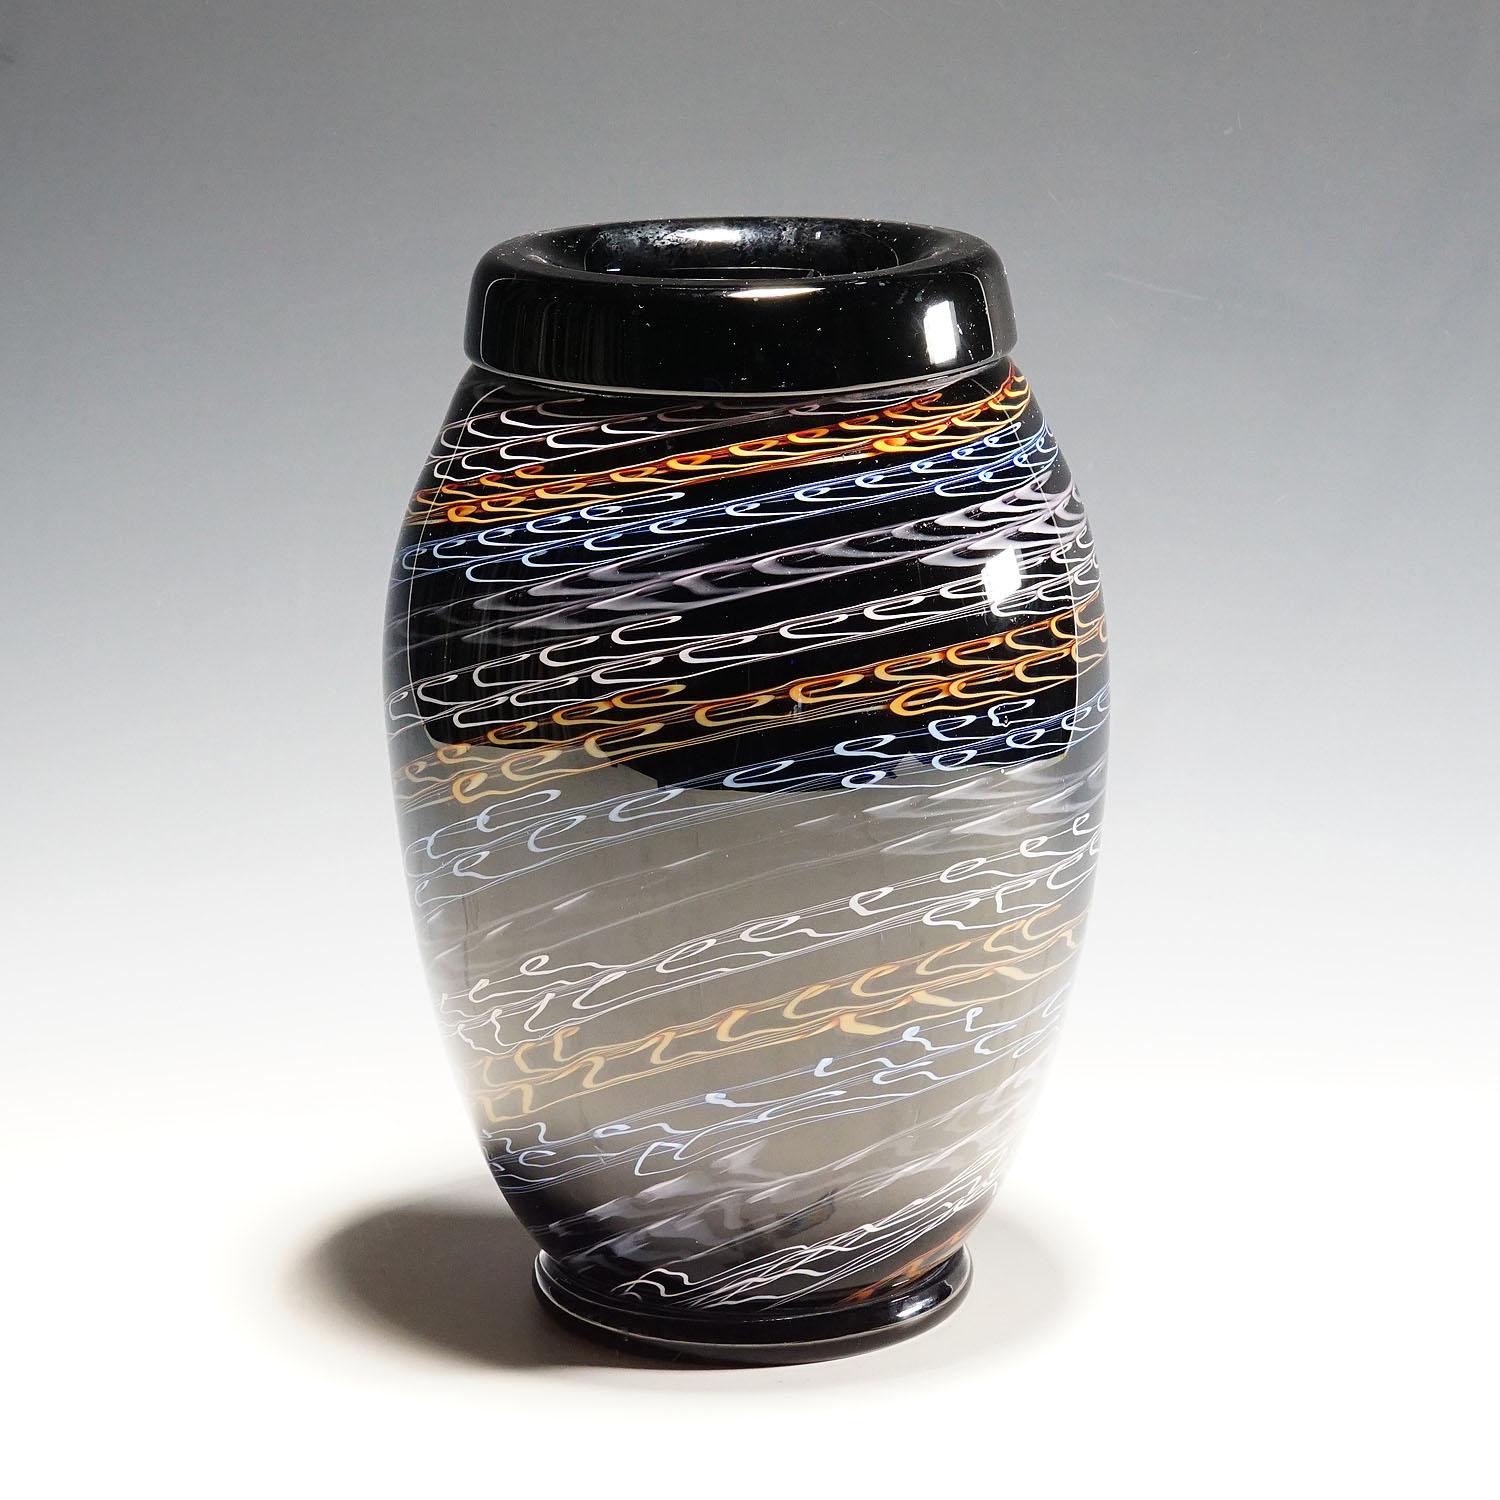 Large Murano Art glass vase by Master Paolo Crepax 1990s.

A large Murano Art Glass Vase by designed and executed by Glassmaster Paolo Crepax in the 1990s. Thick black glass with ondulating decoration in blue white and orange and covered with a